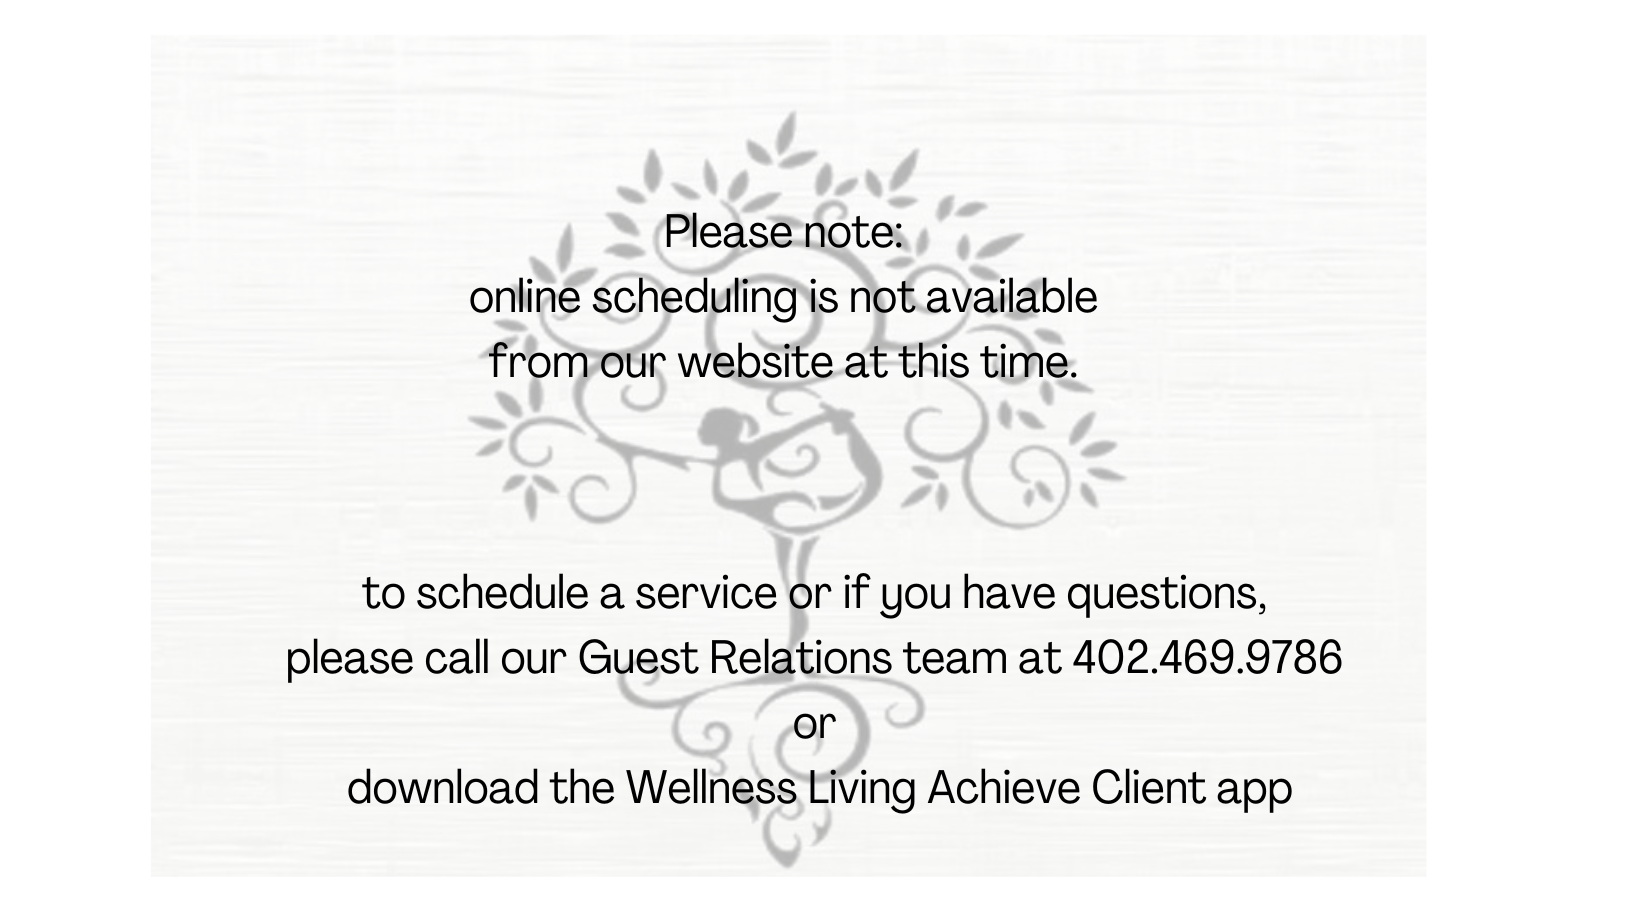 online scheduling is not available from our website at this time. (1)